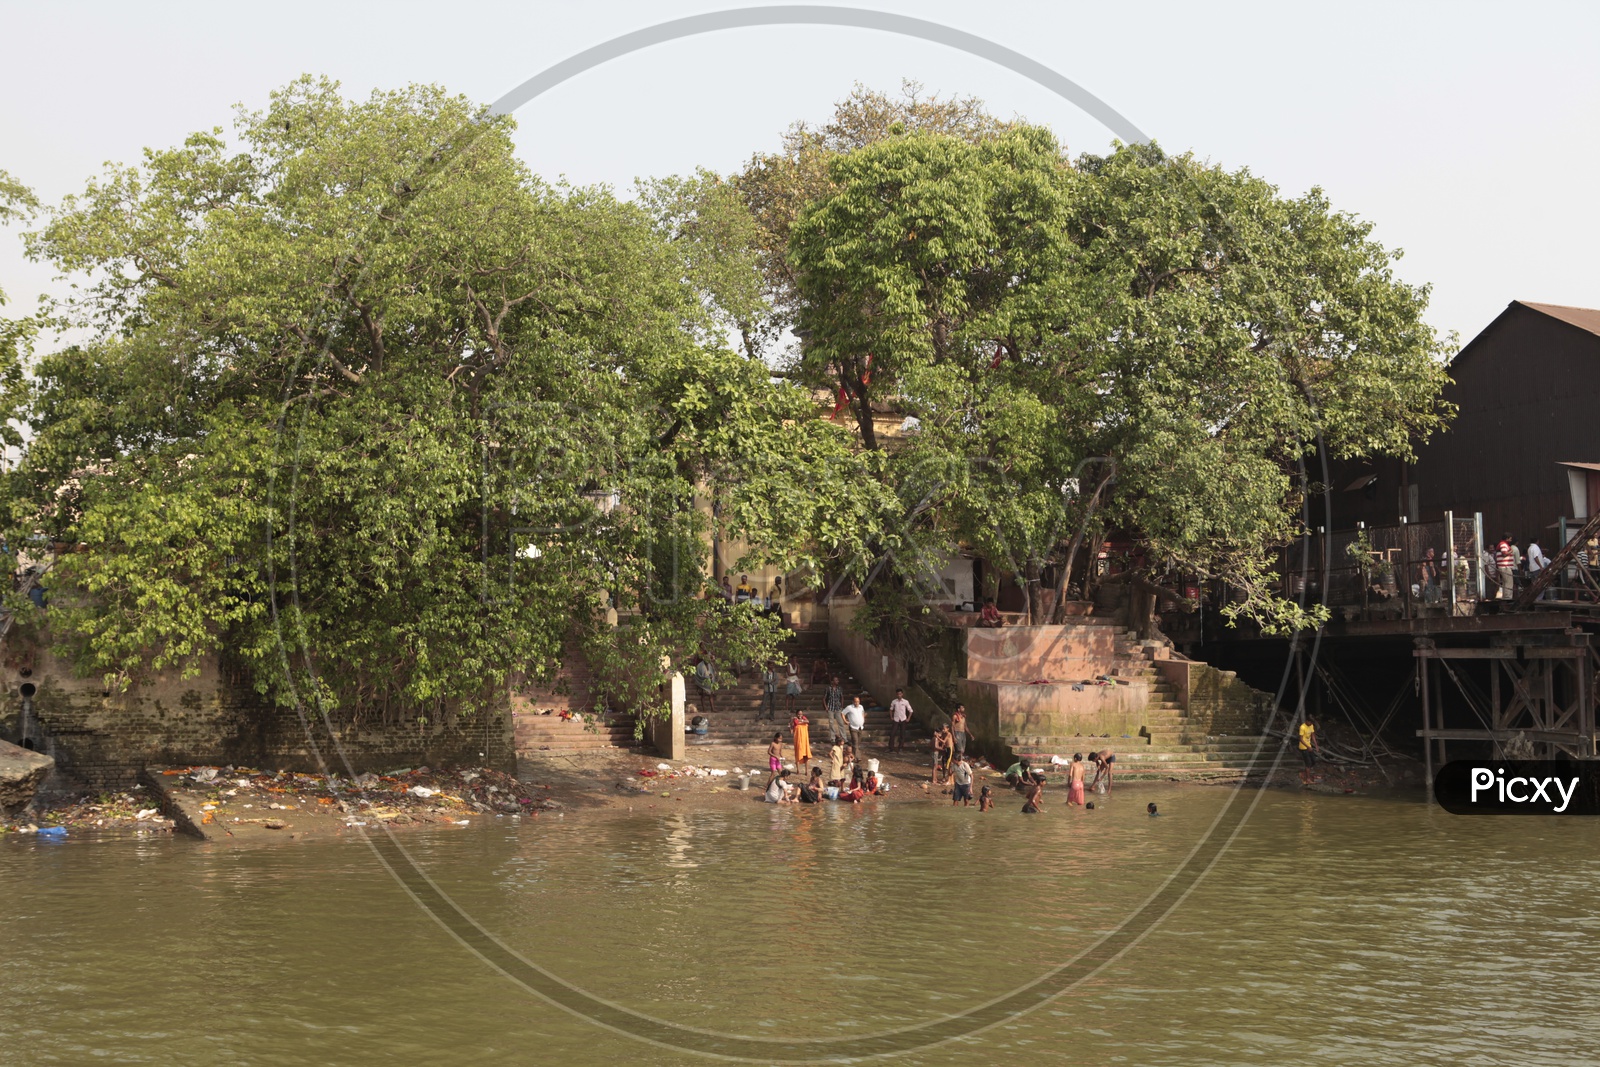 Local people taking a bath alongside the Ghats of Hooghly River